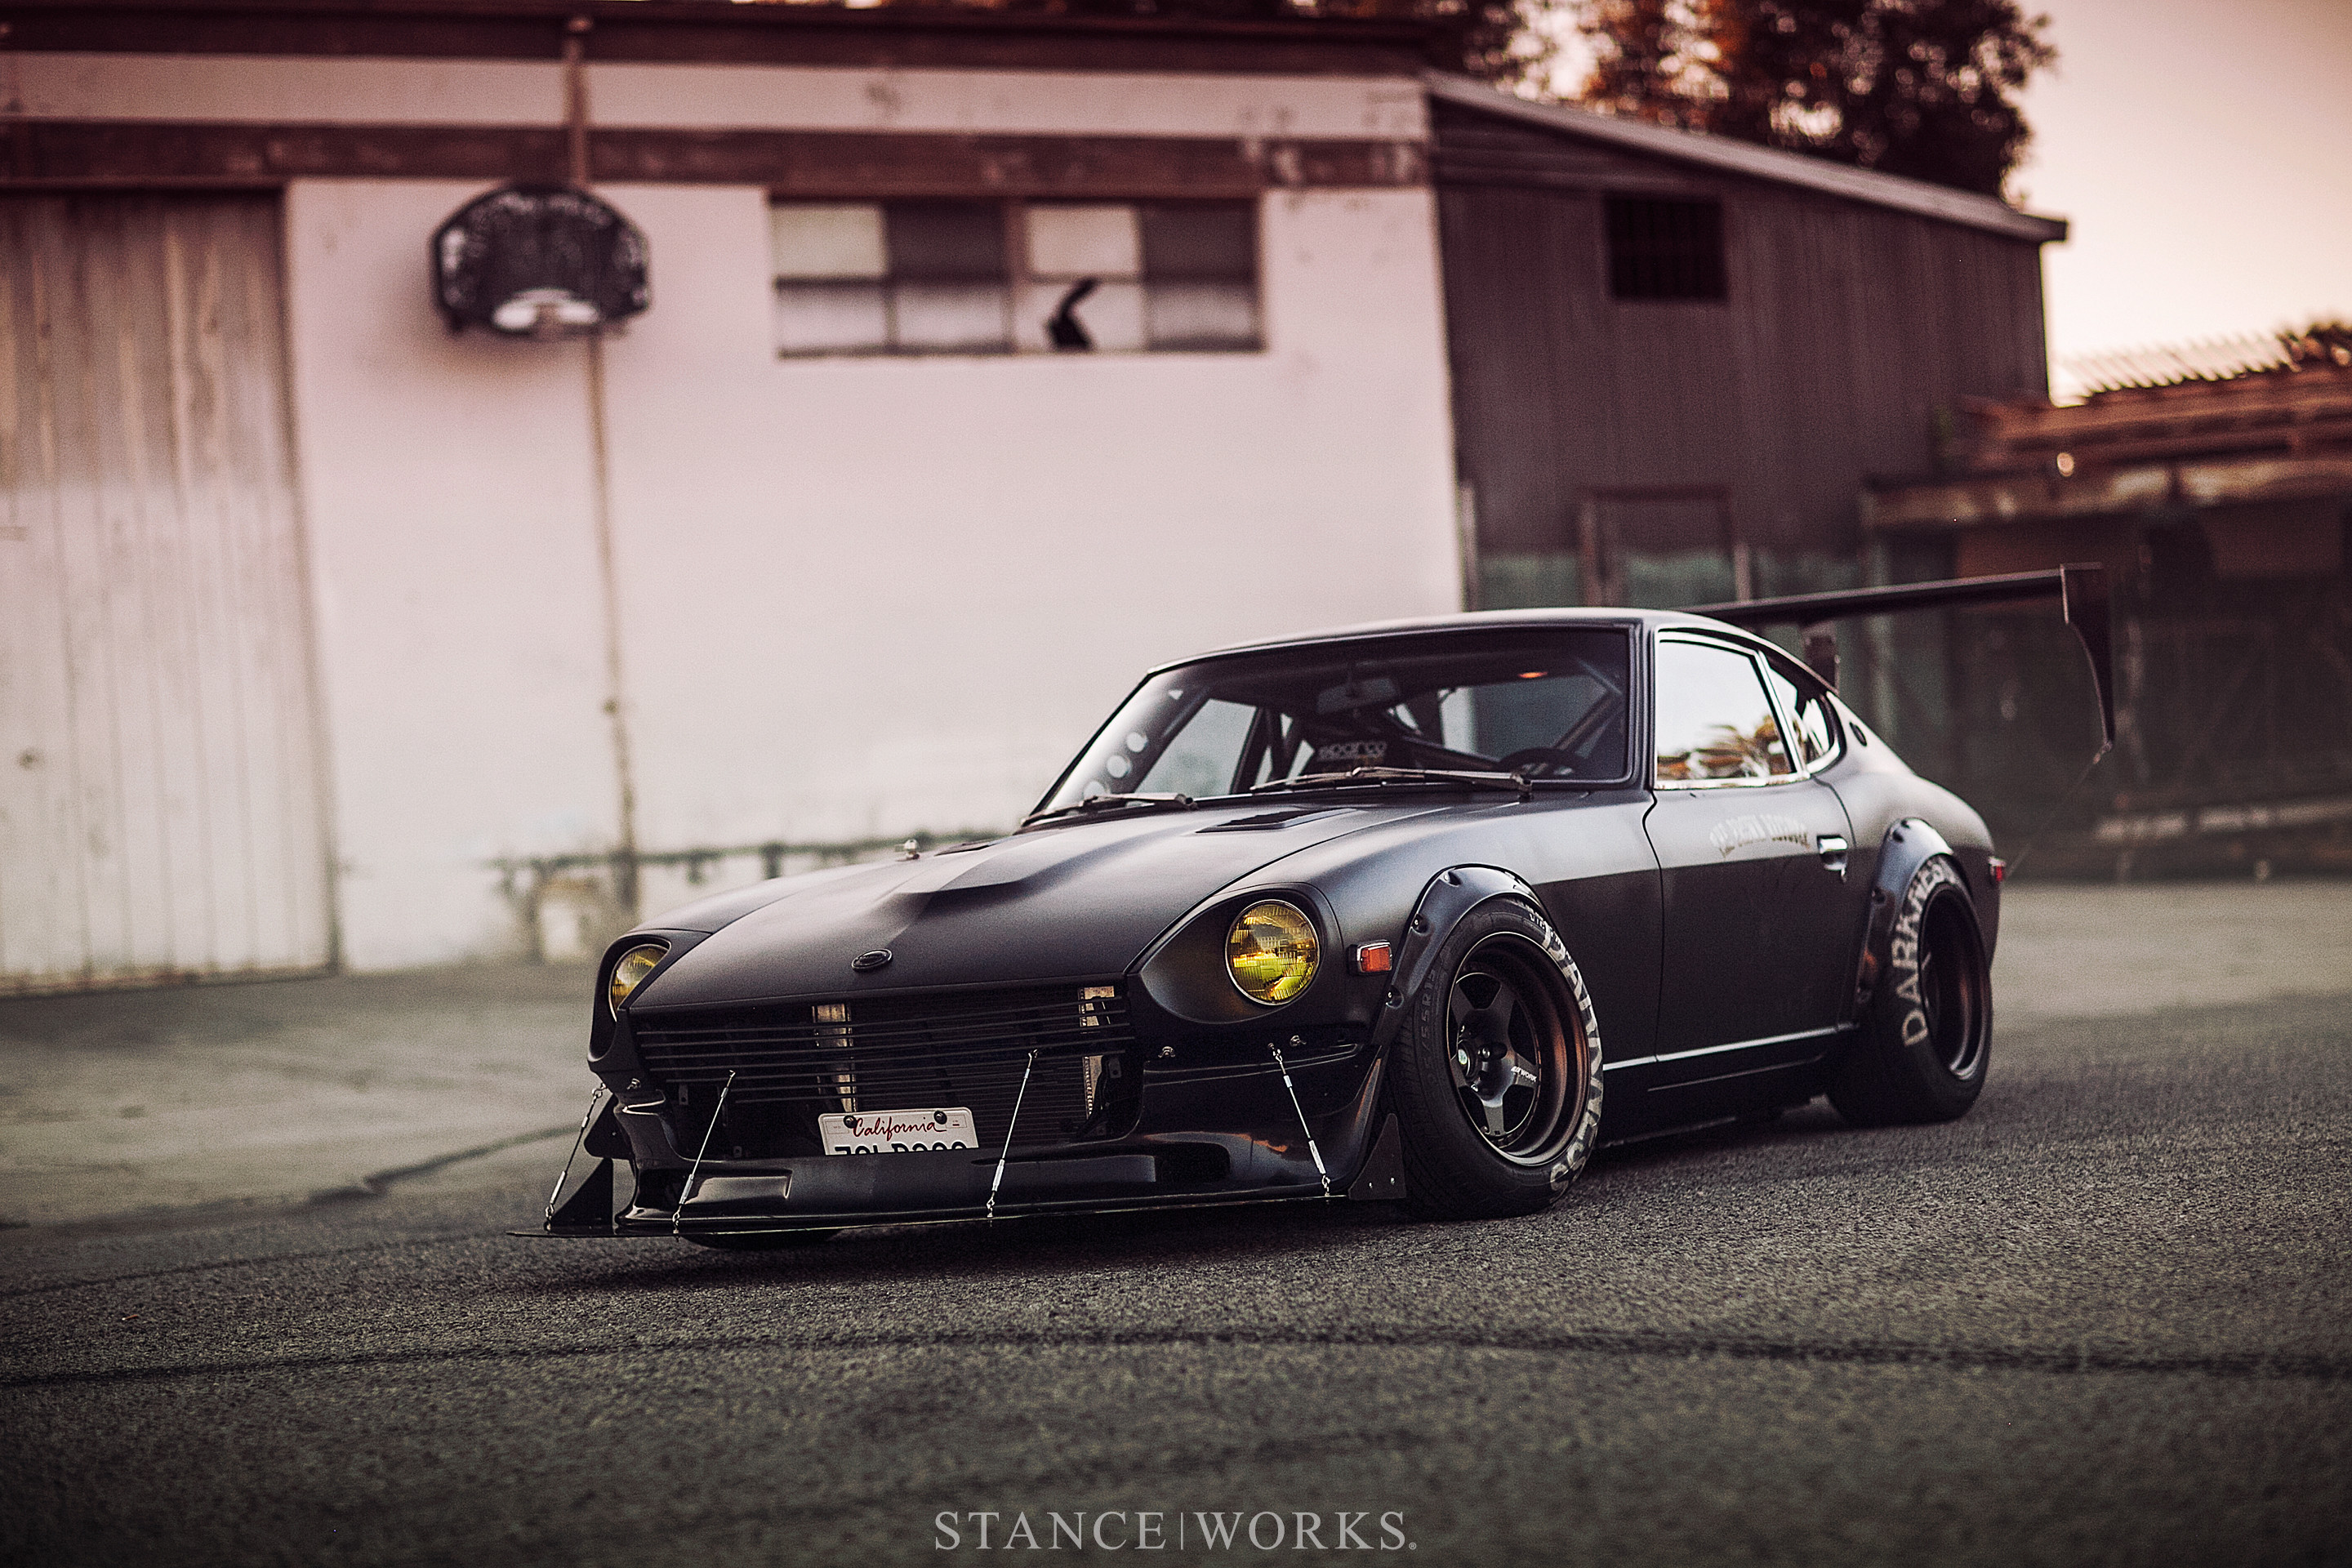 2880x1920 StanceWorks Wallpaper - Riley Stair's LS6-Powered Datsun 260Z - Stance Works